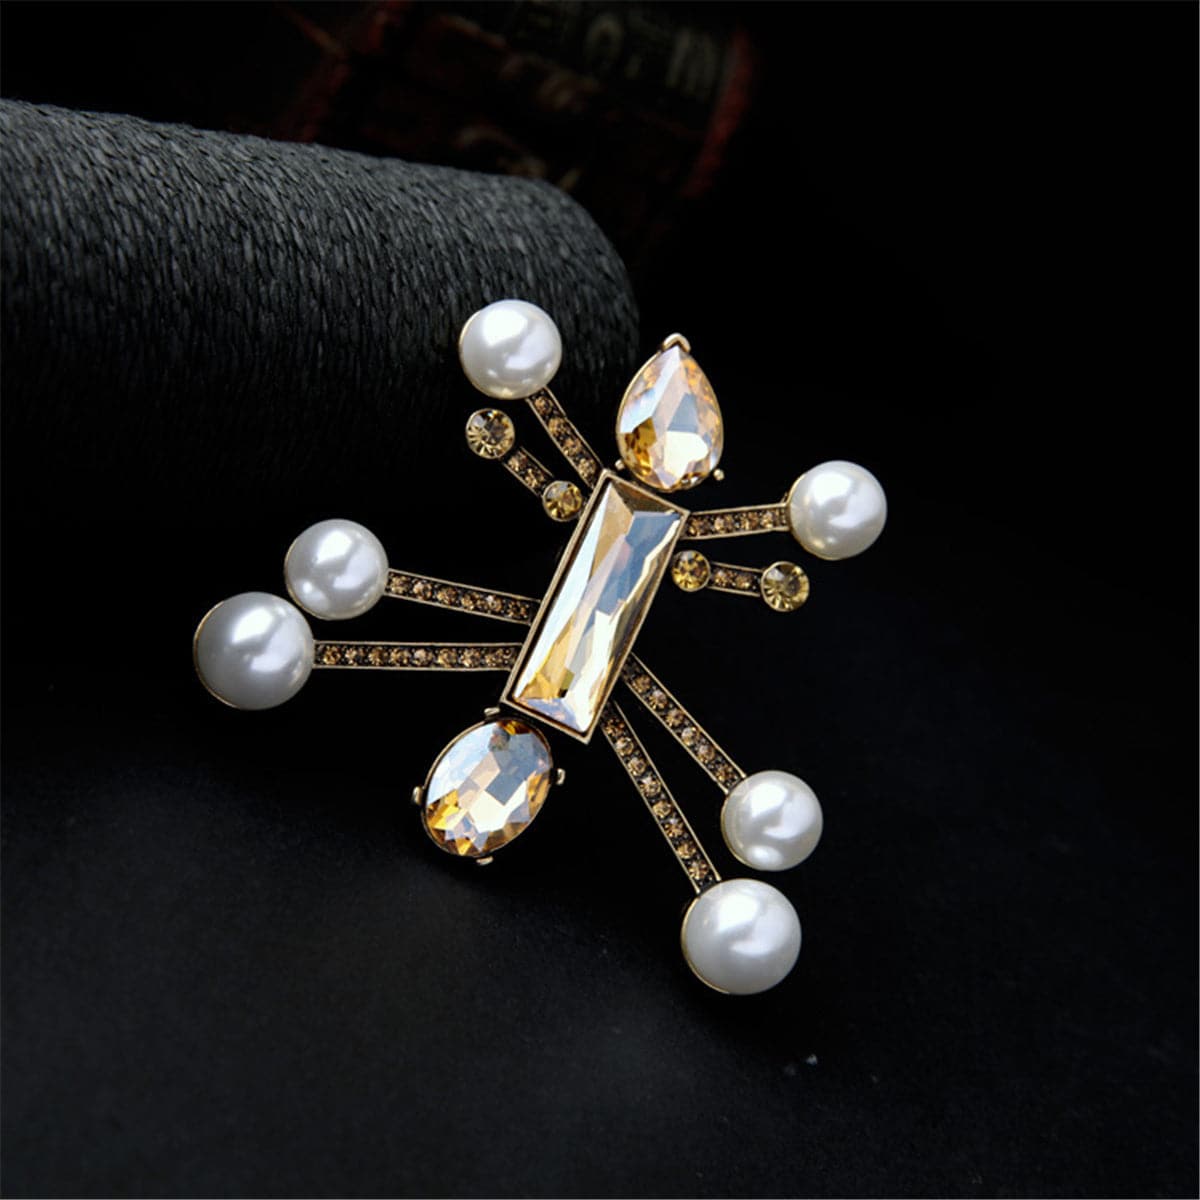 Crystal & Pearl 18K Gold-Plated Robot Brooch